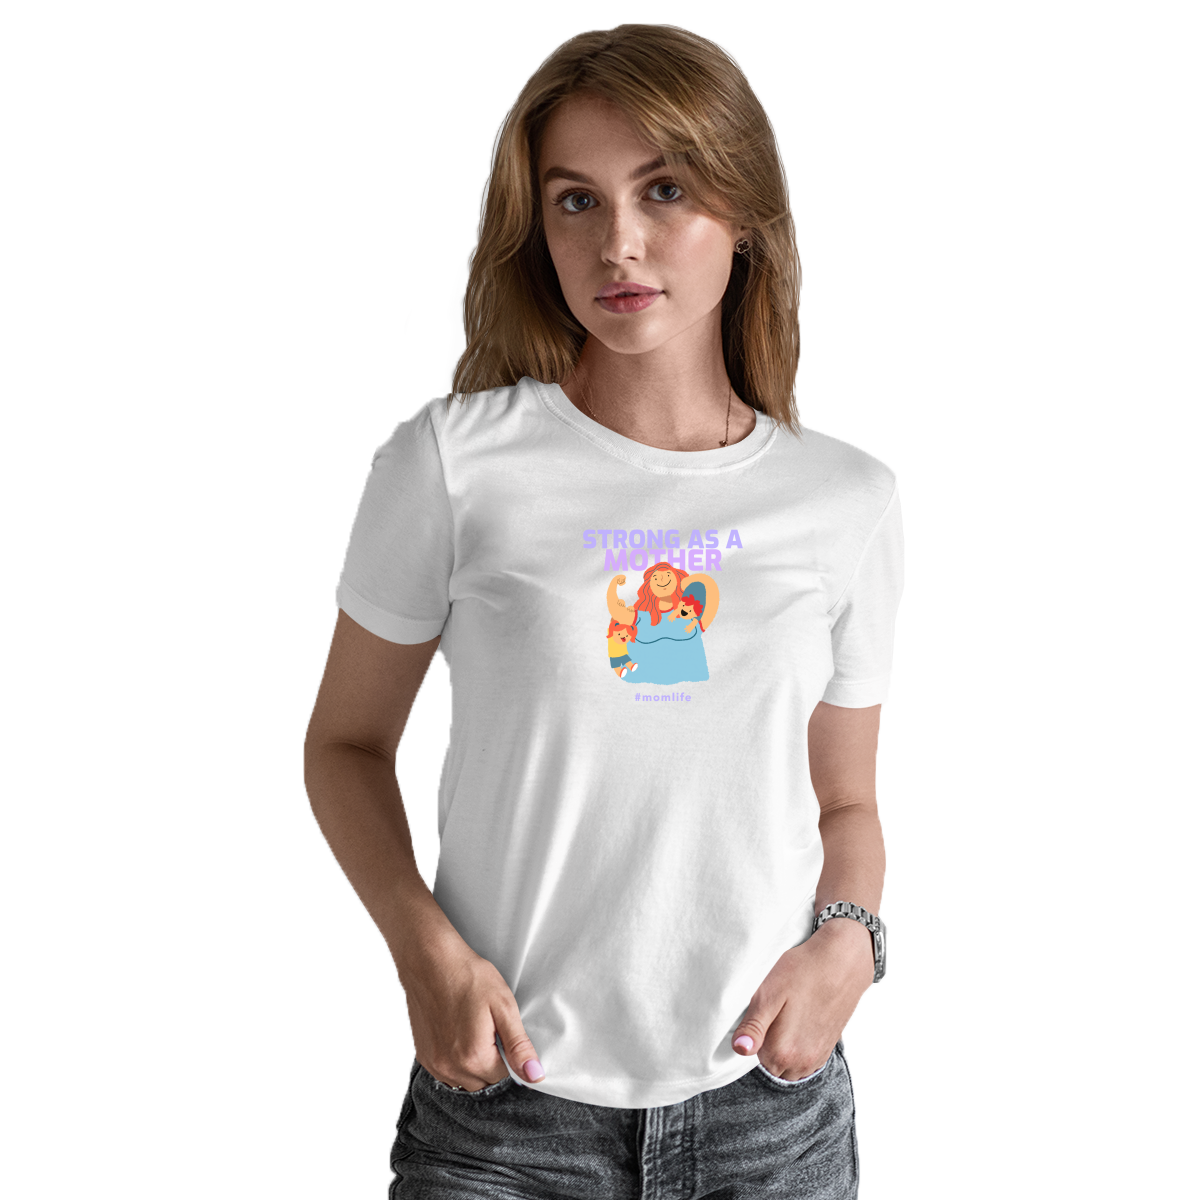 Strong as a Mother Women's T-shirt | White